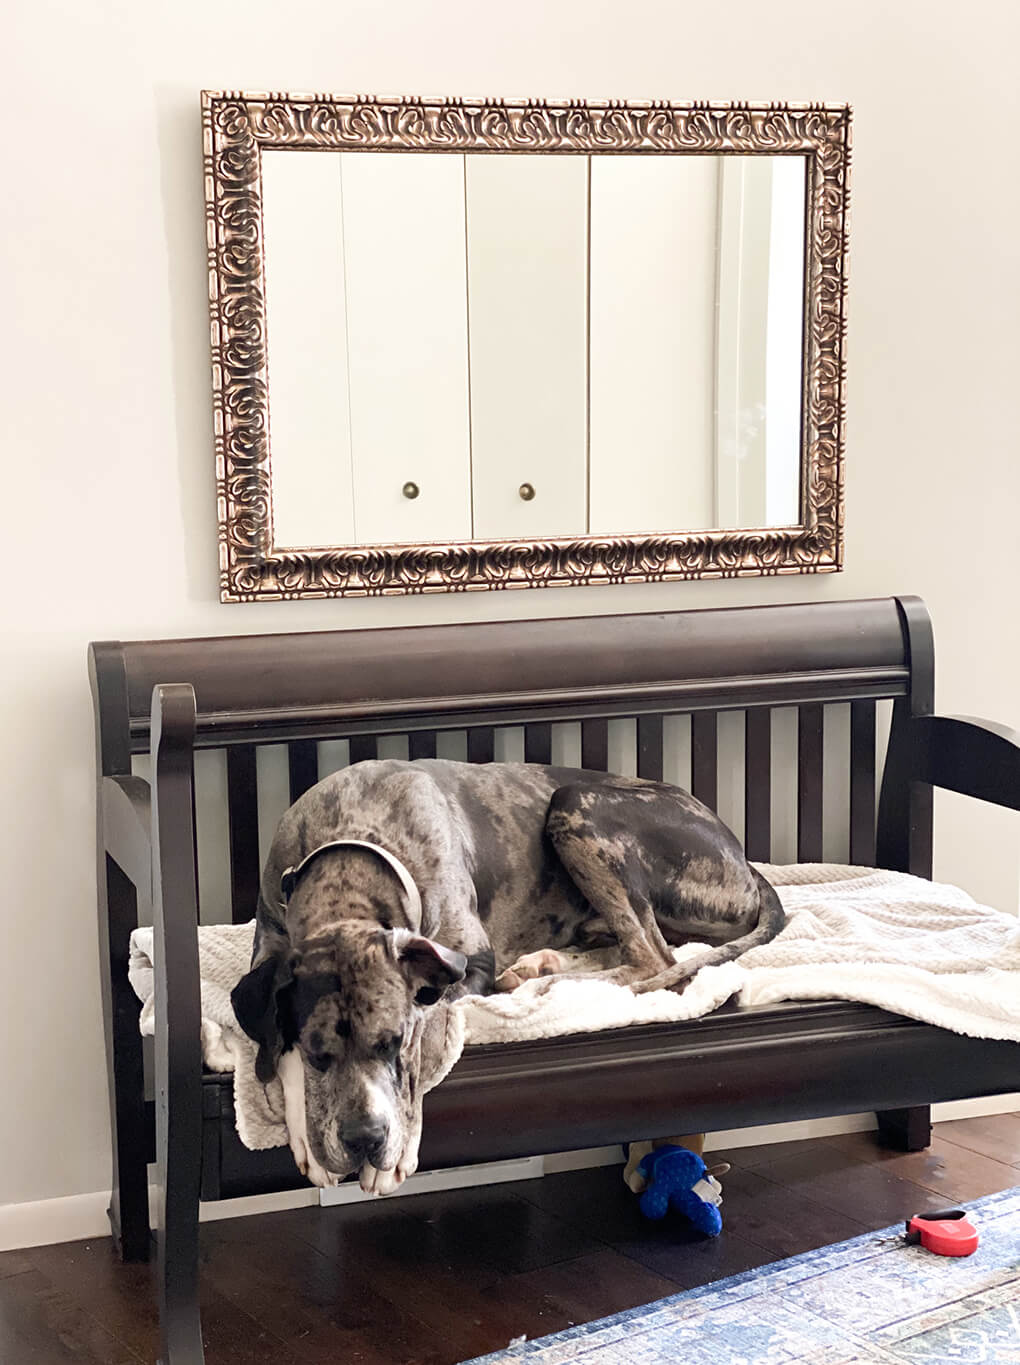 A Gutsy Girl’s Favorites Issue 17 agutsygirl.com #healthyliving #greatdane #adoptdogs #fosteradopt Harley on dad's bench